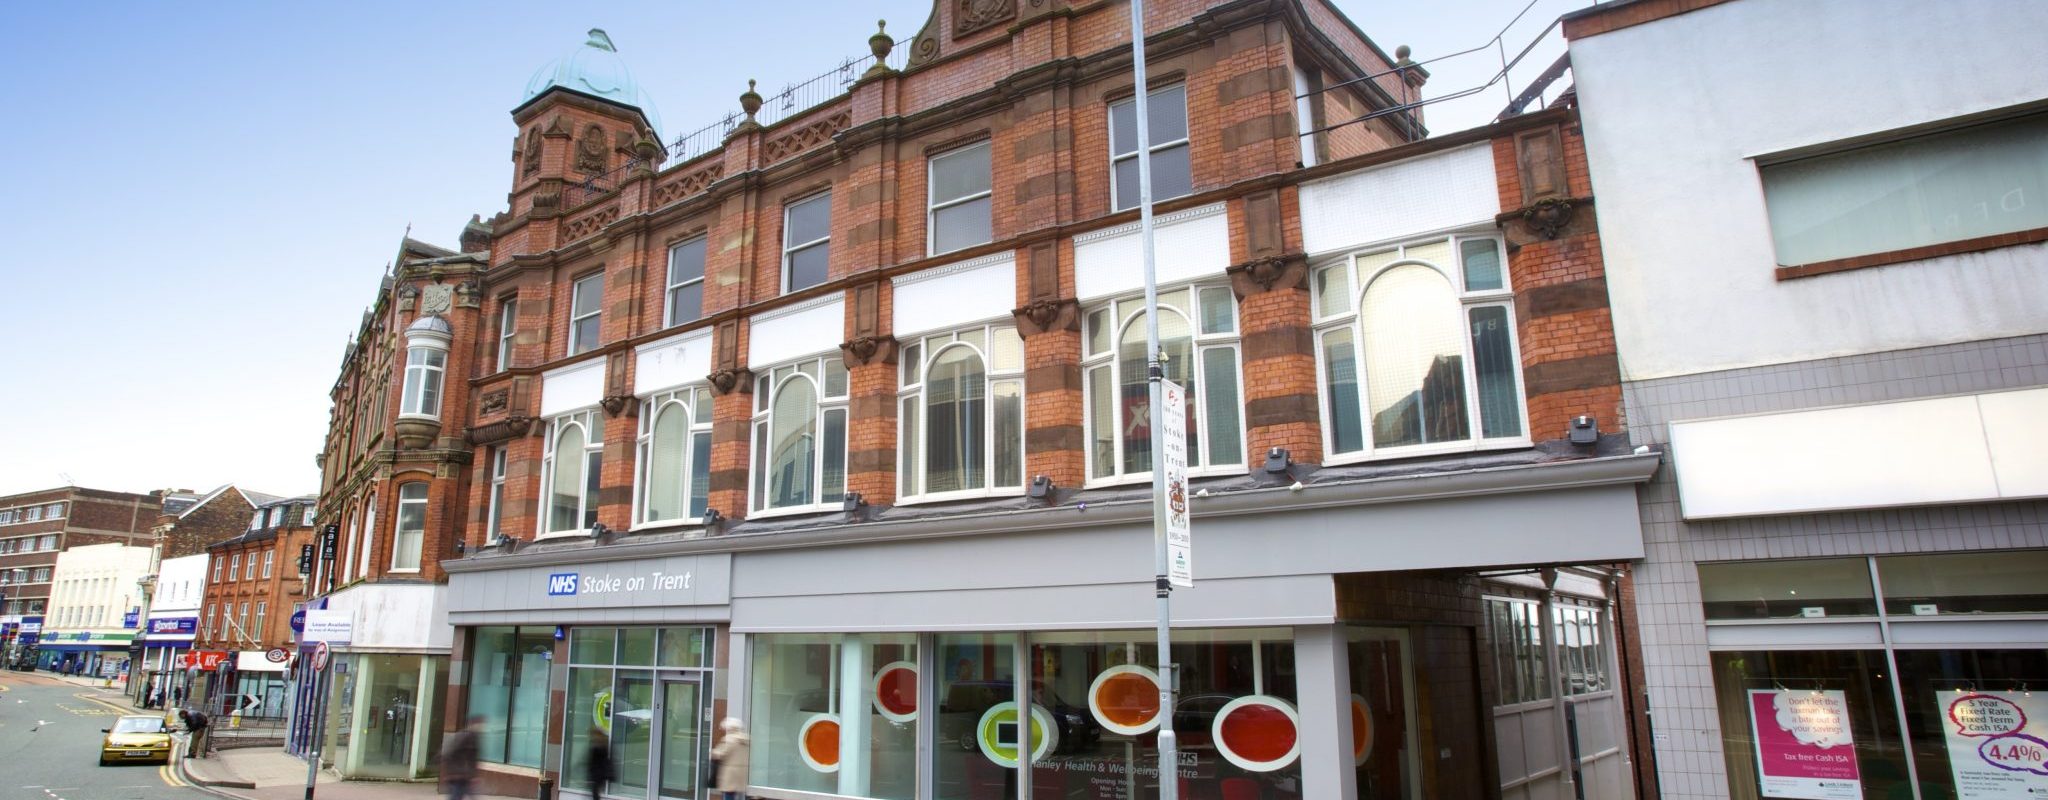 Hanley Health and Wellbeing Centre